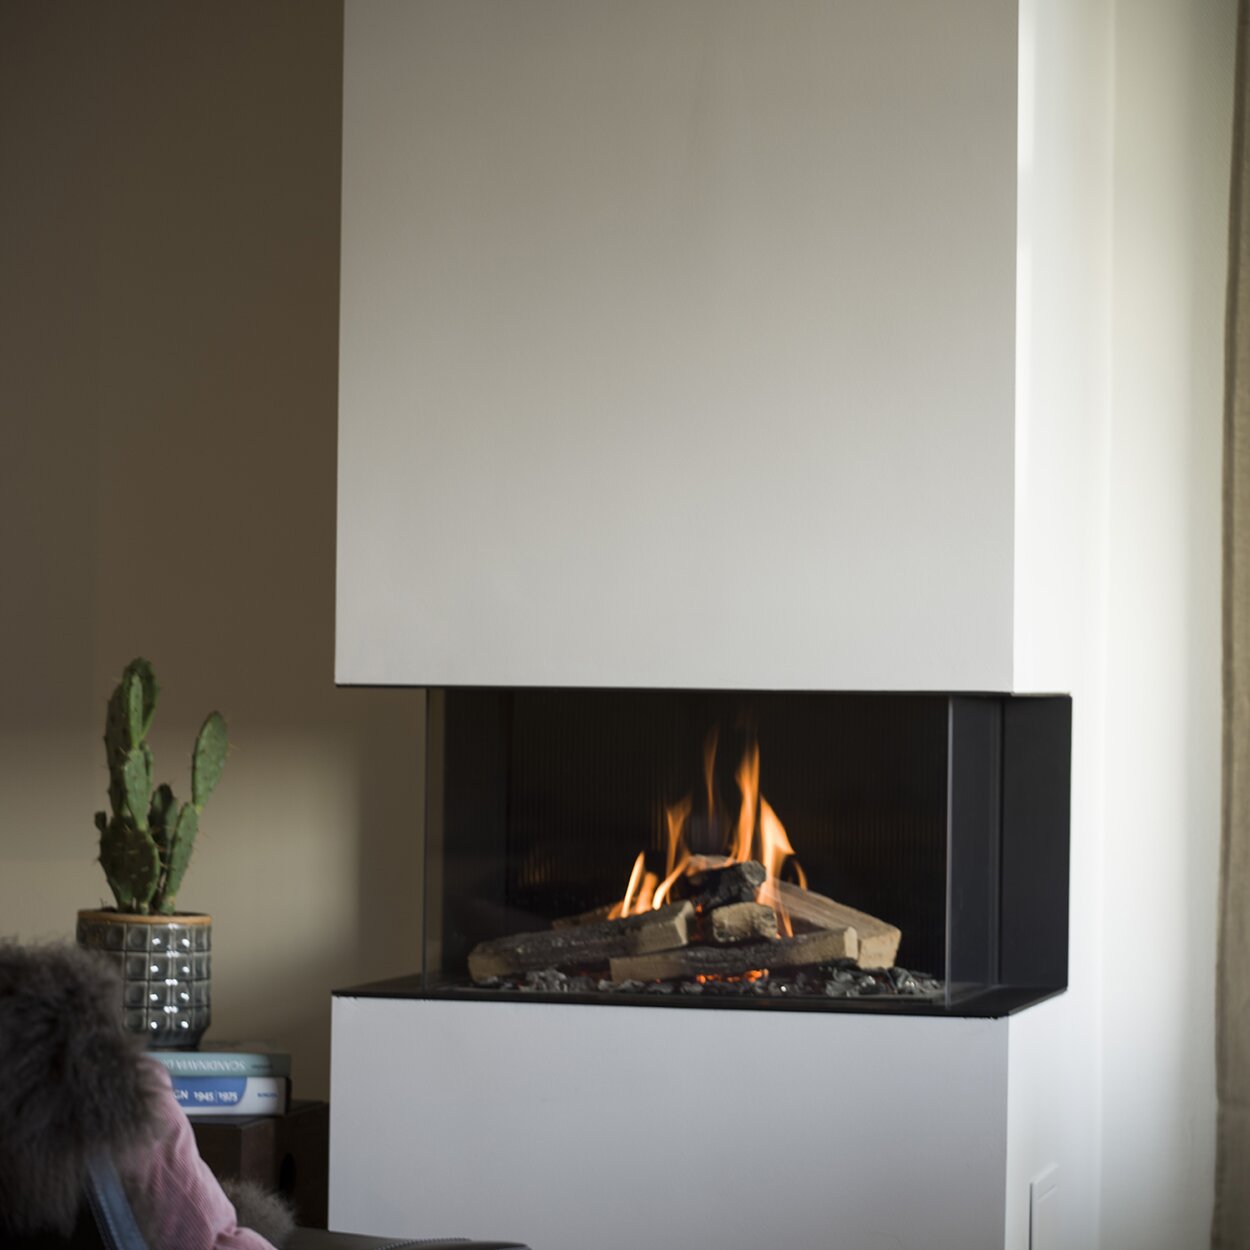 VISIO 90 3S gas fireplace as a 3-sided fireplace with a quiet gas flame in a white cladding next to a plant and reading chair